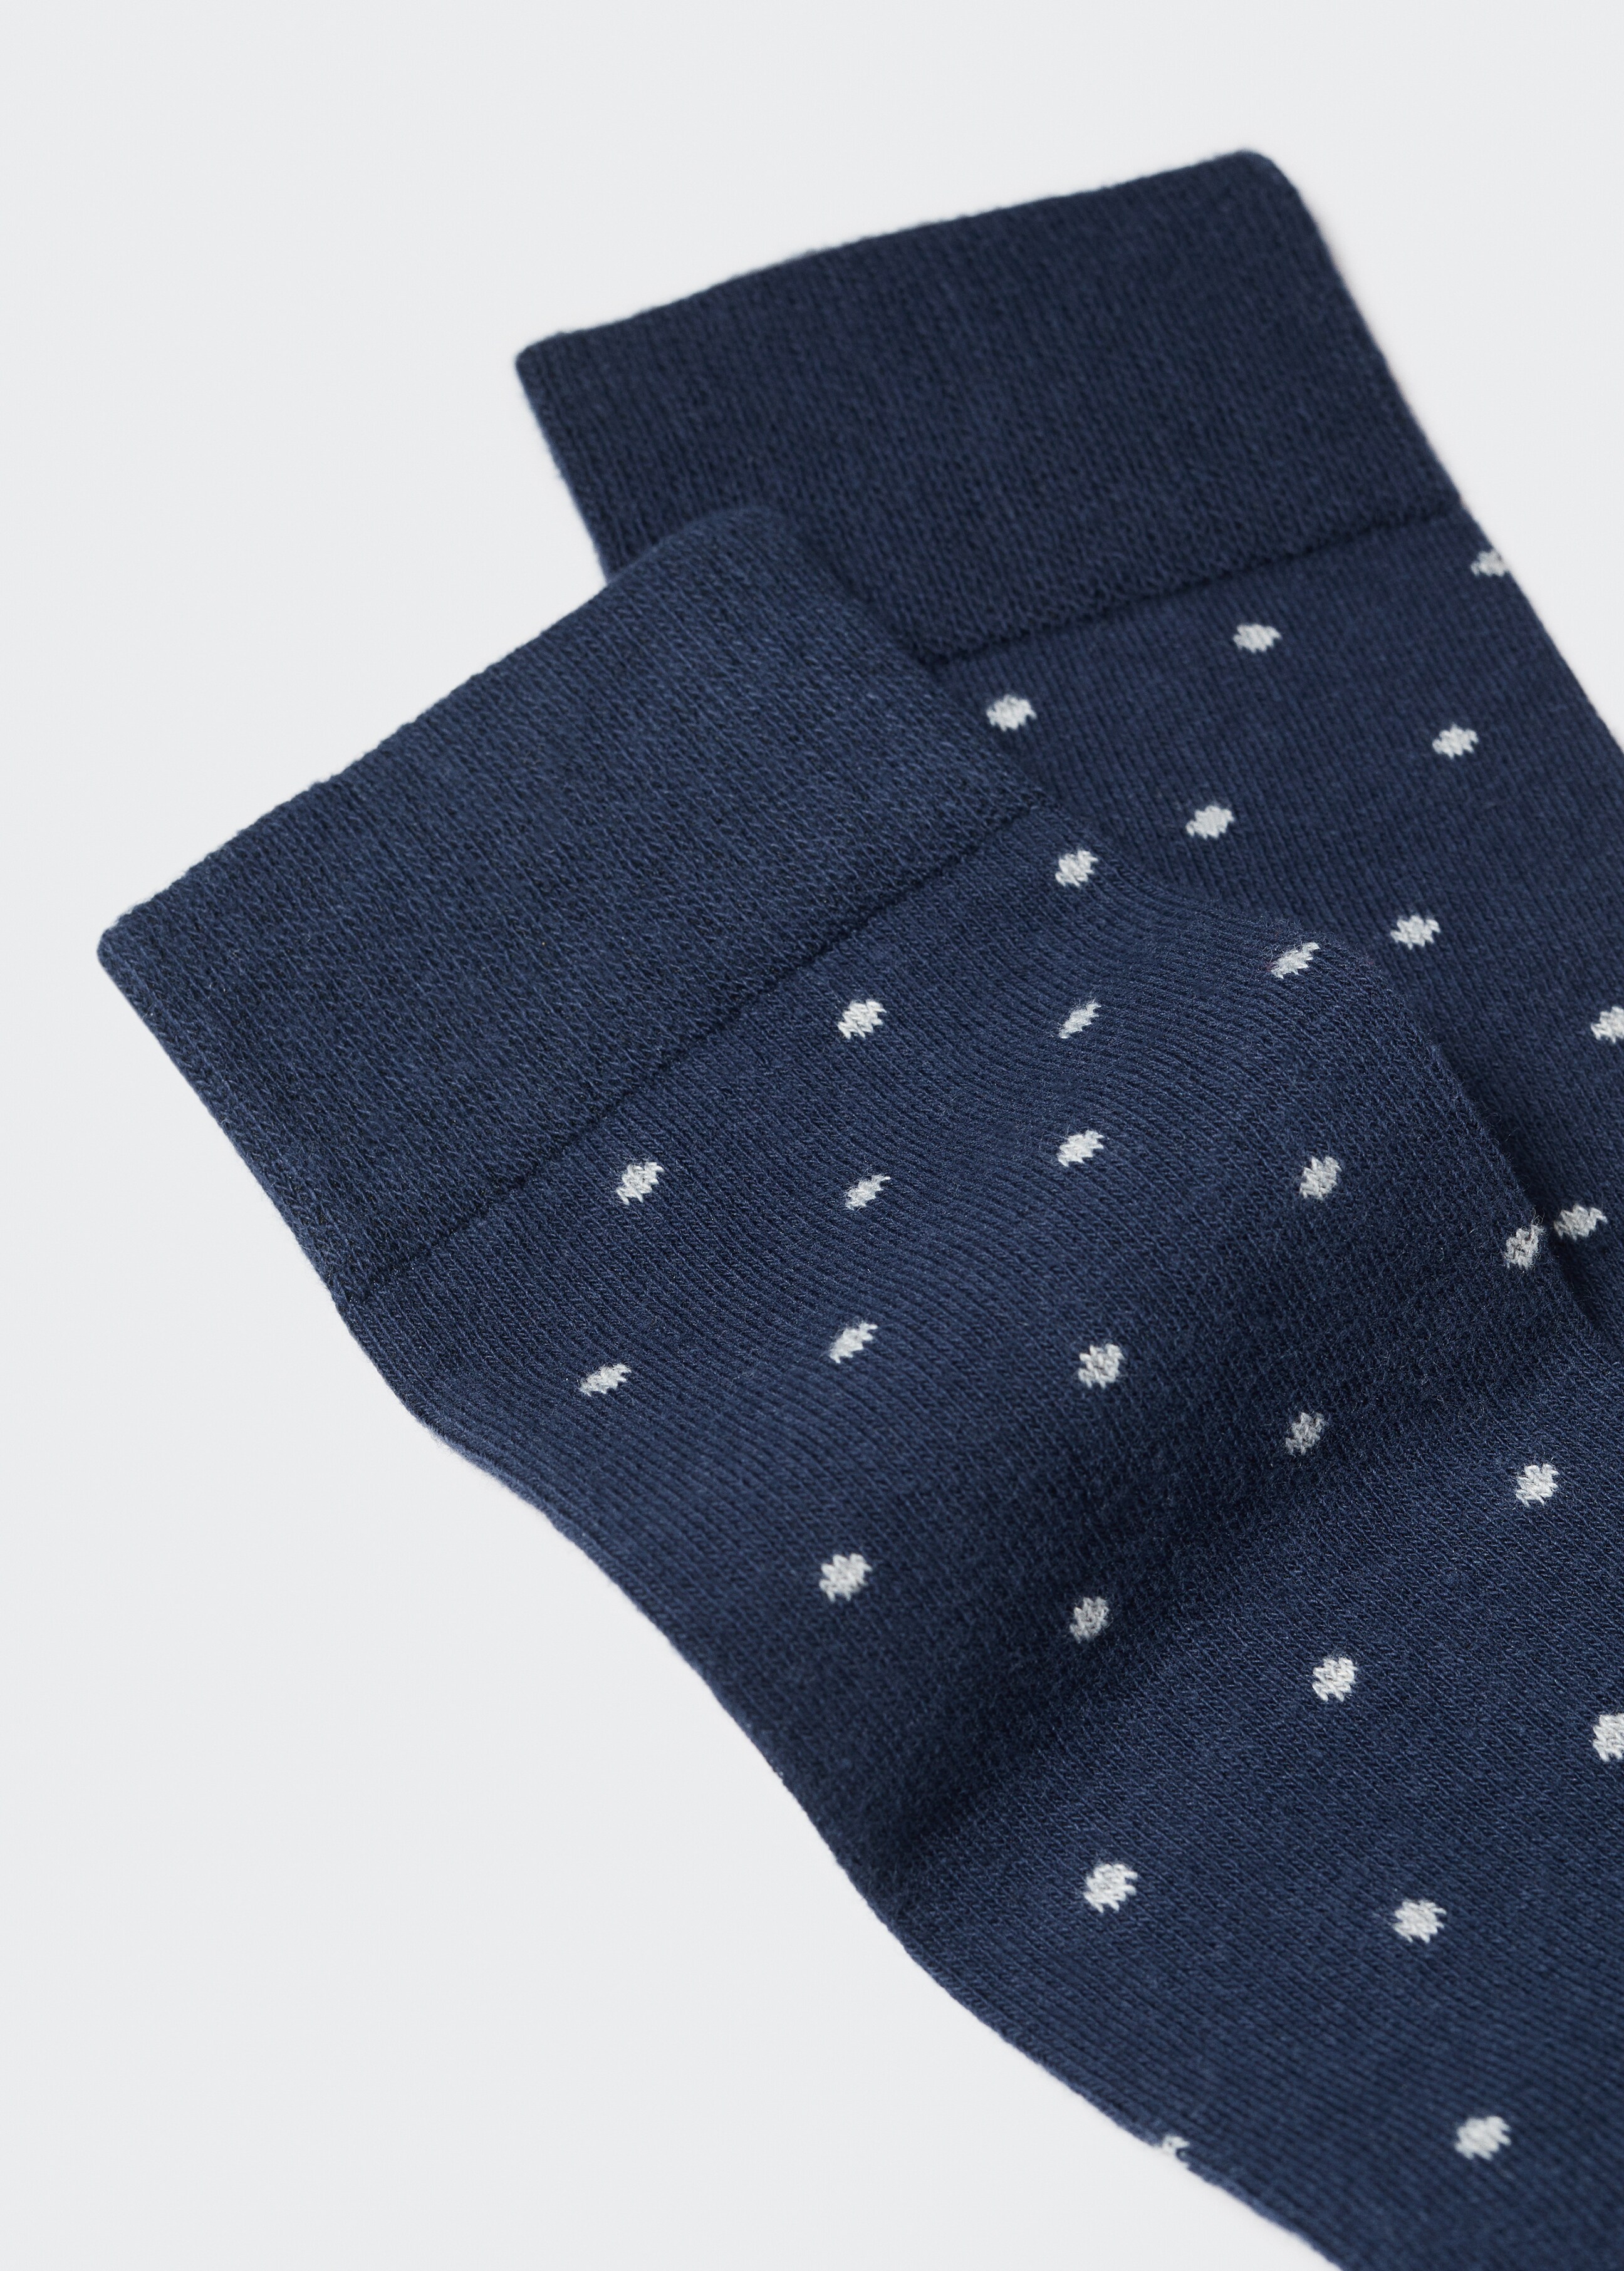 Polka dot cotton socks - Details of the article 8